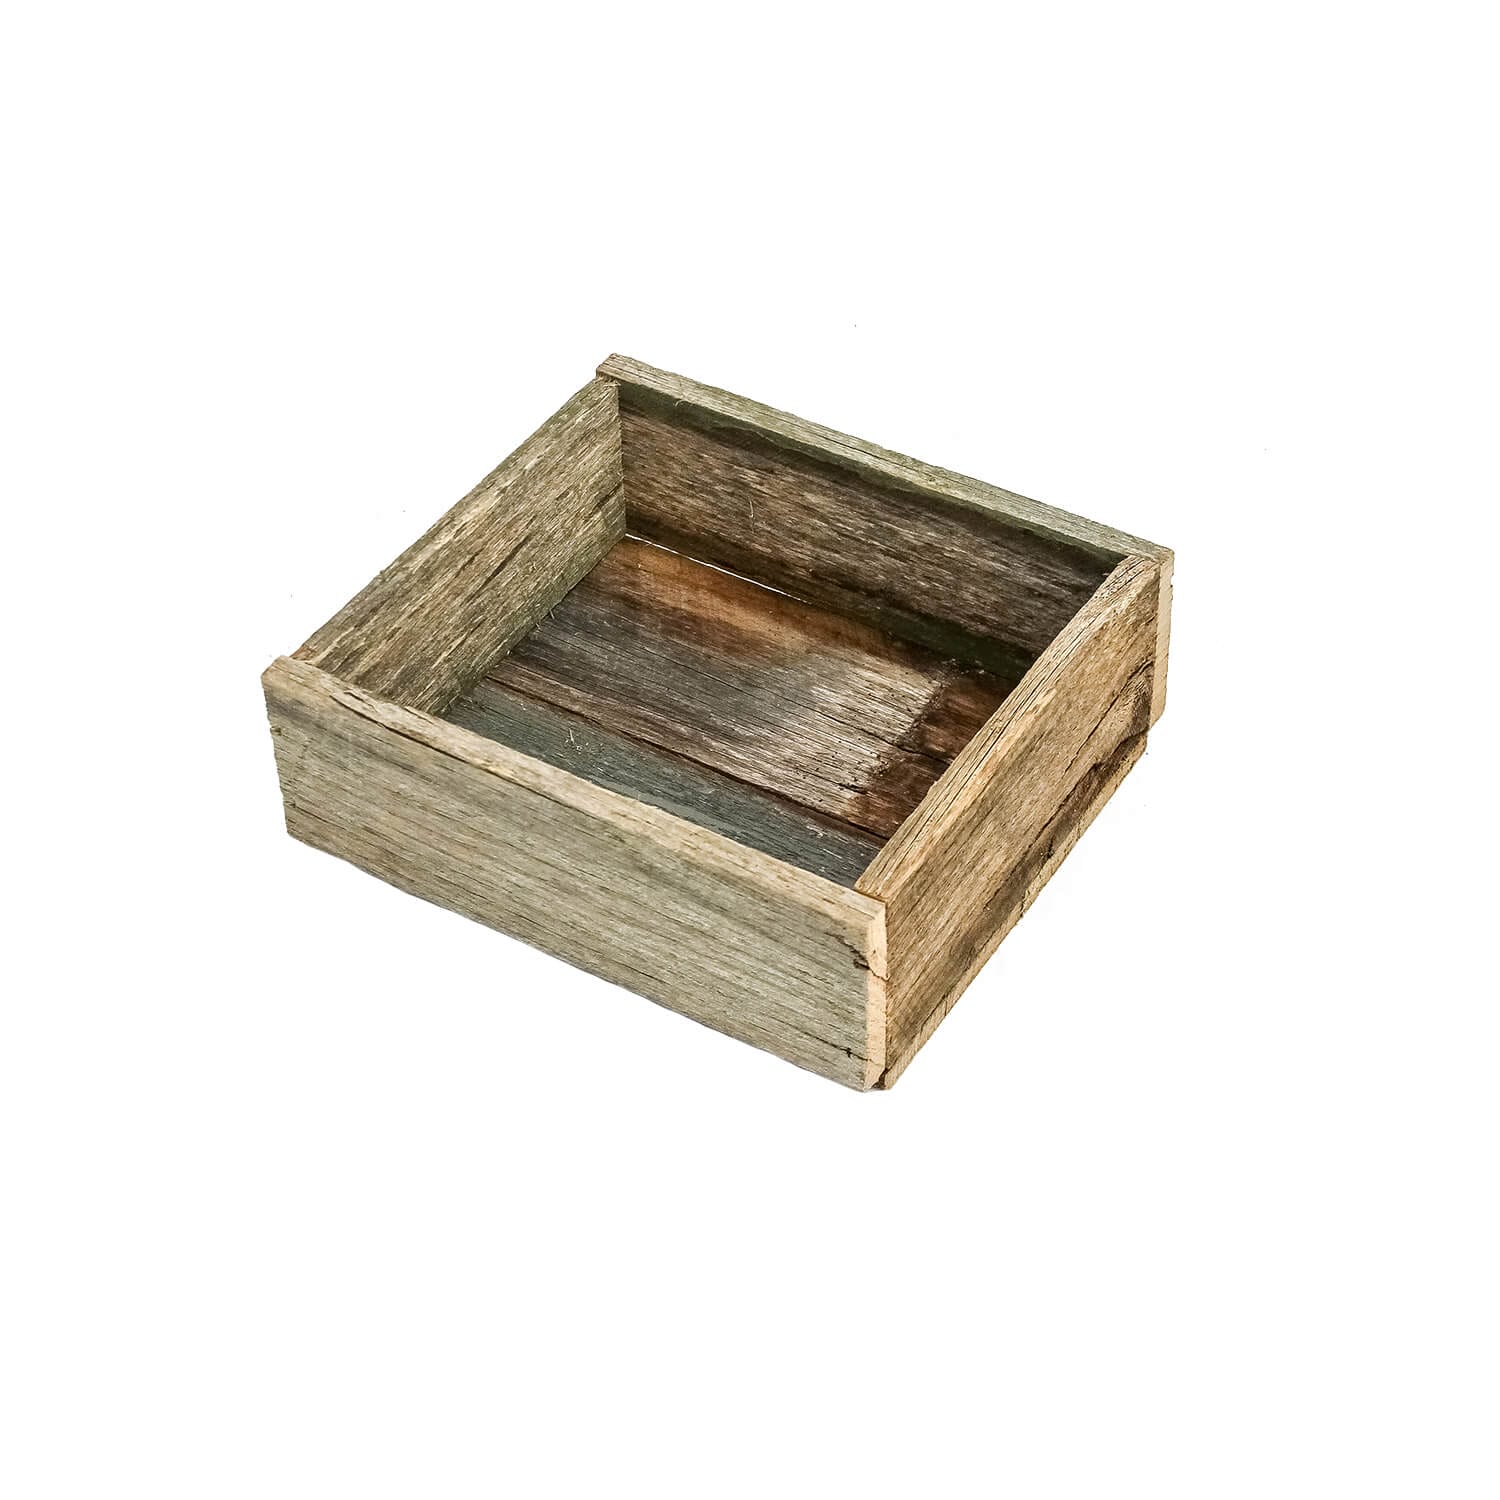 Wooden Rustic Shallow Crates